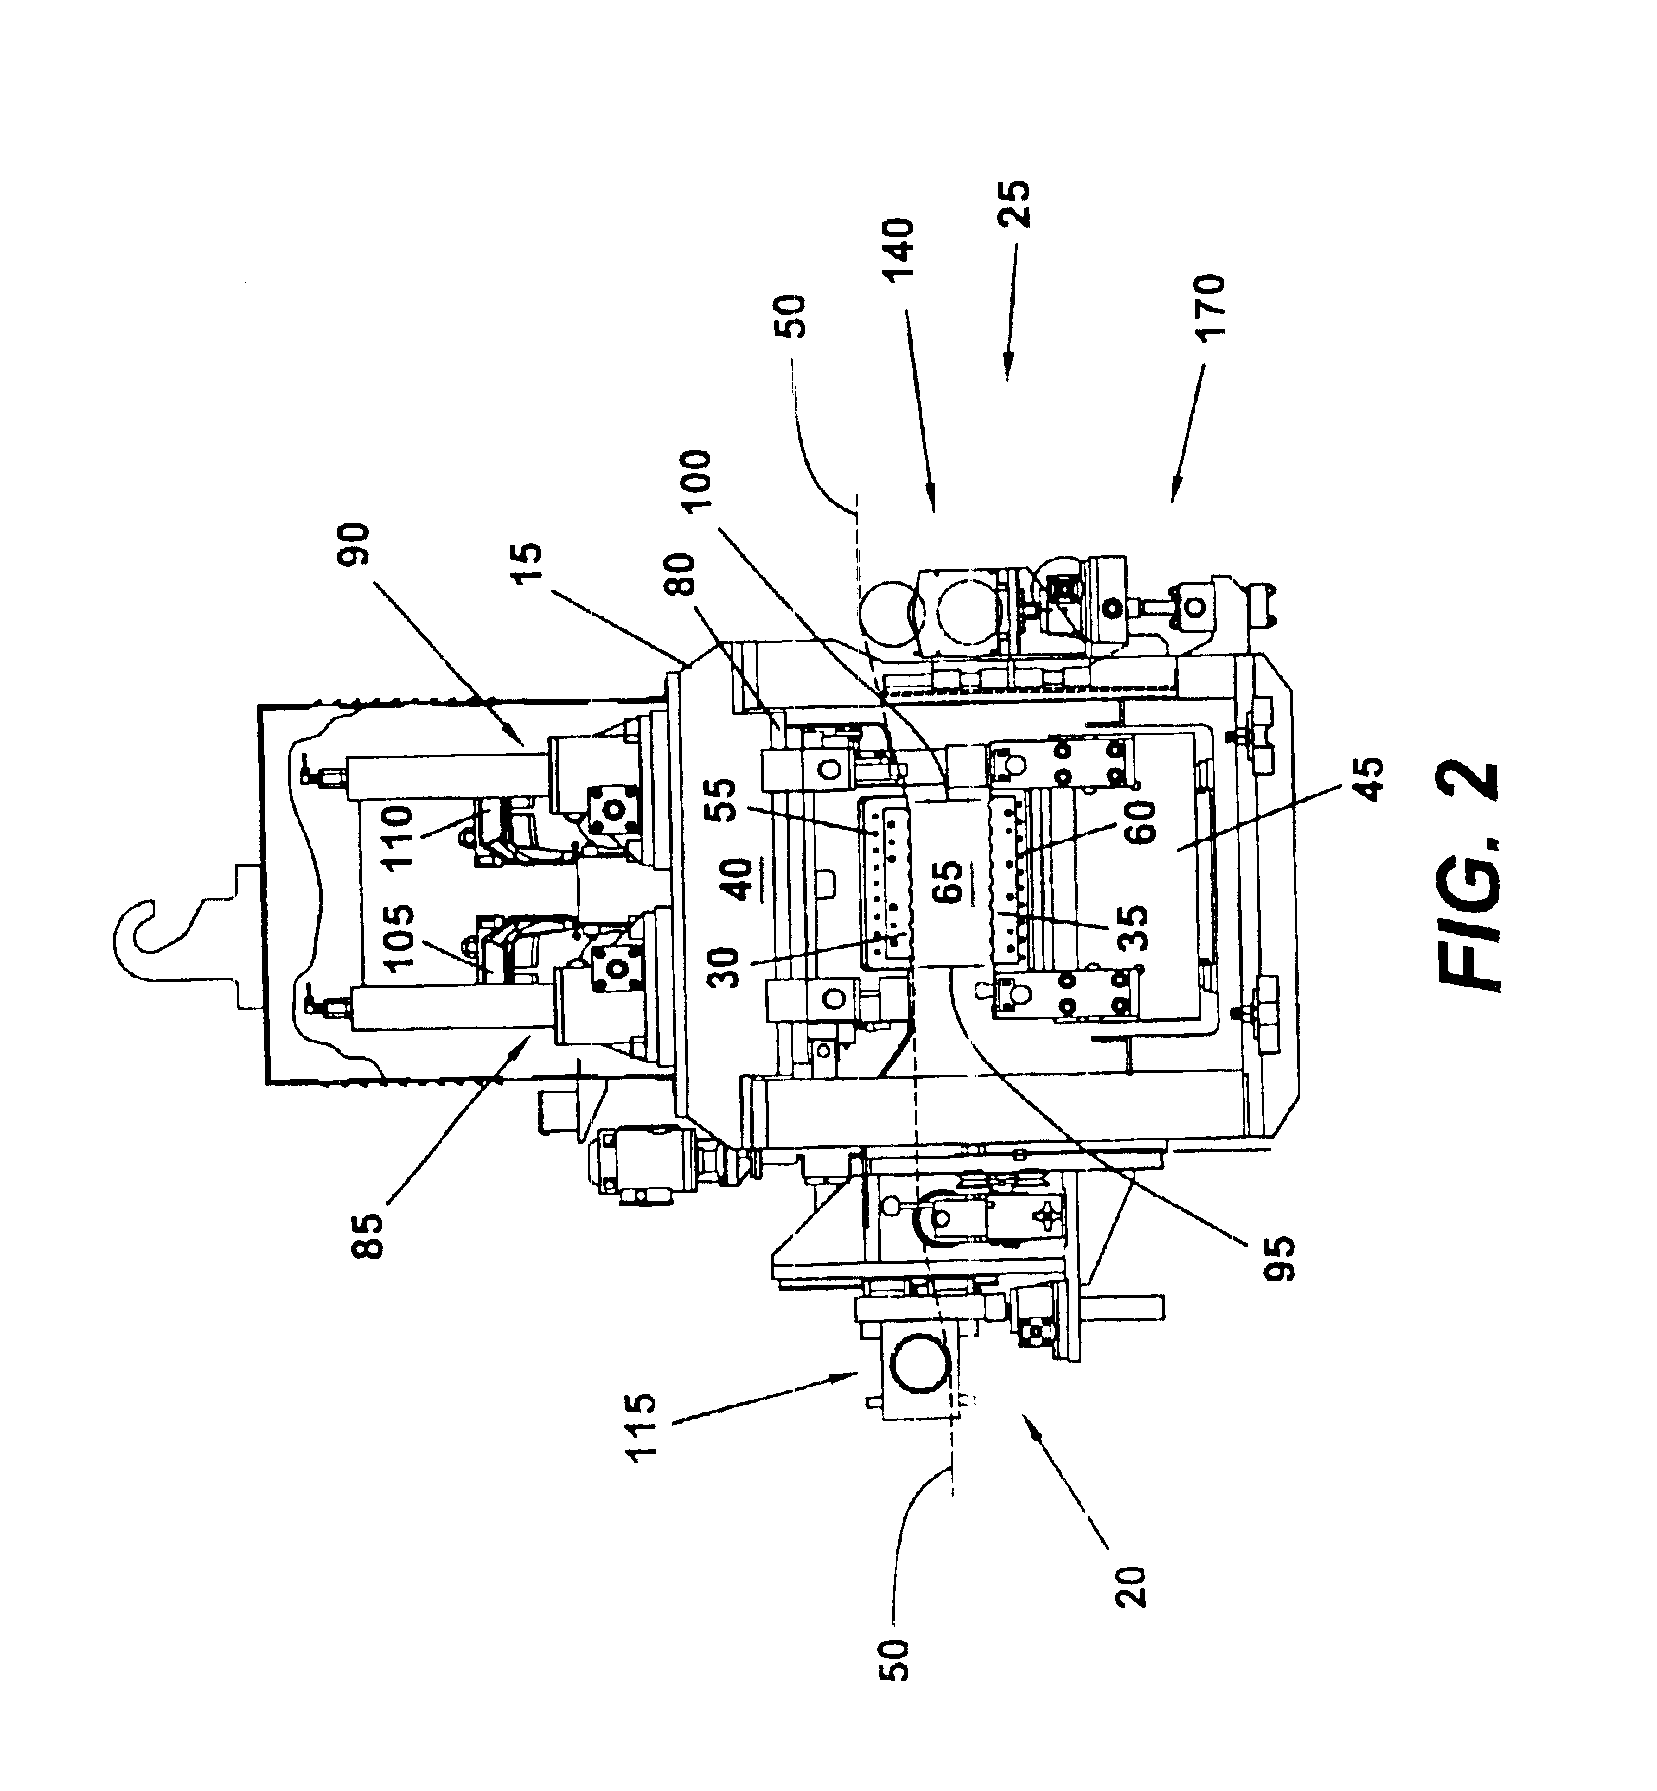 Integrated actuator assembly for pivot style multi-roll leveler